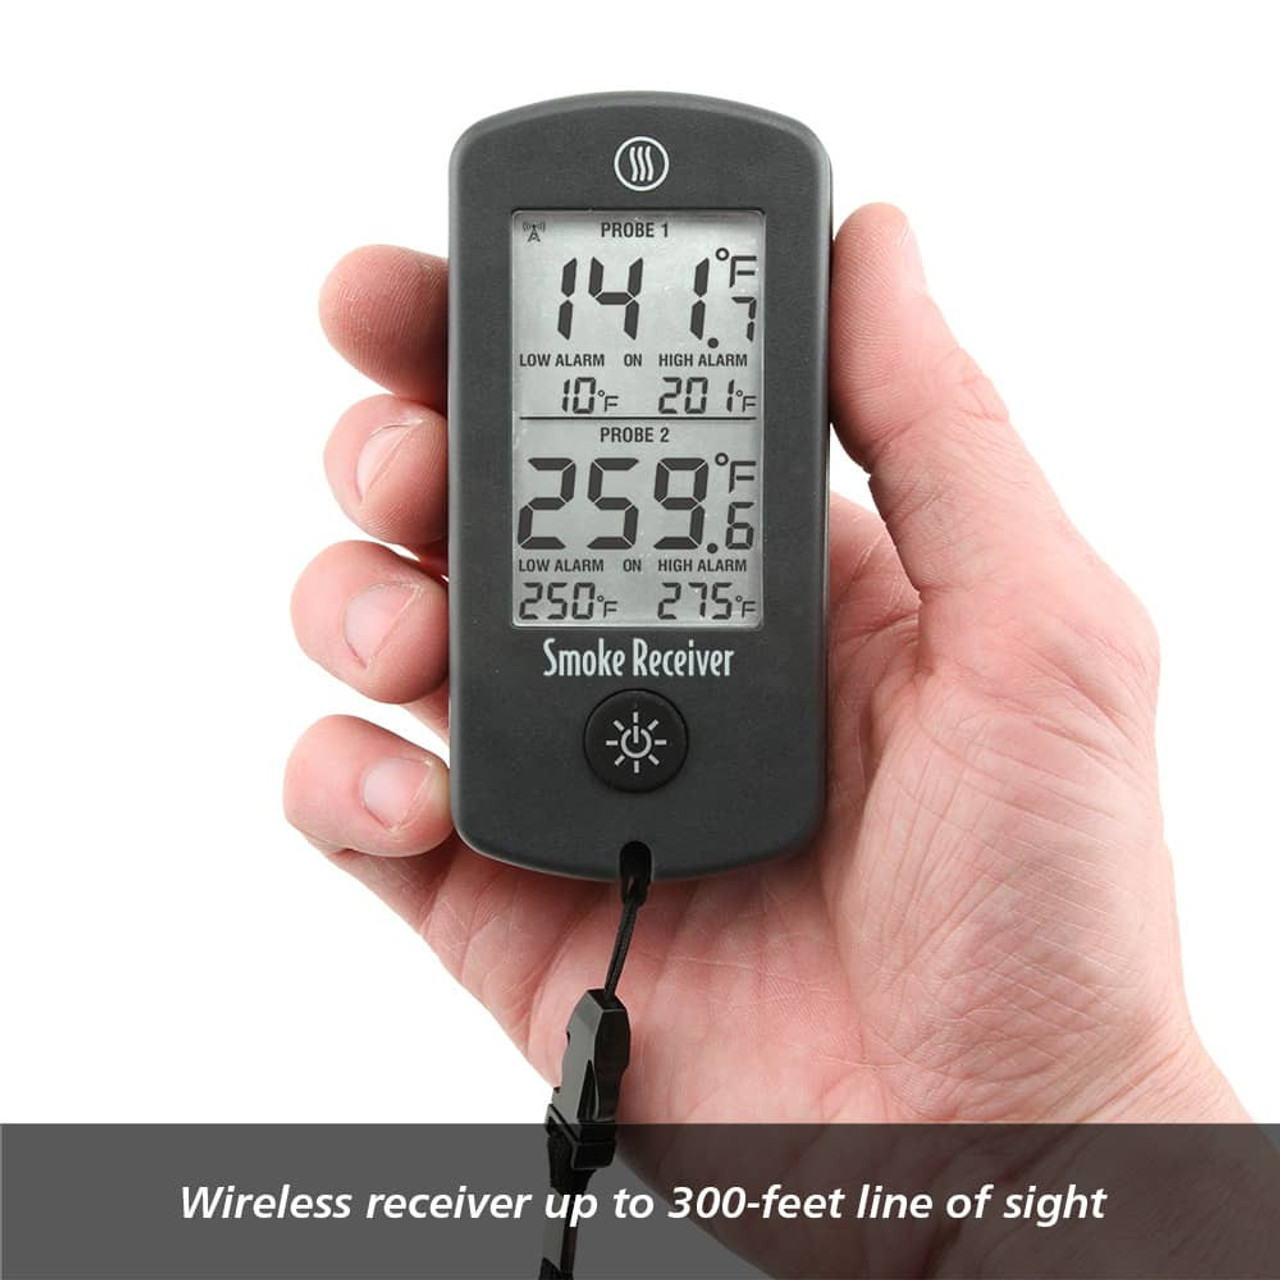 Thermoworks is having a sale on meat thermometers—just in time for